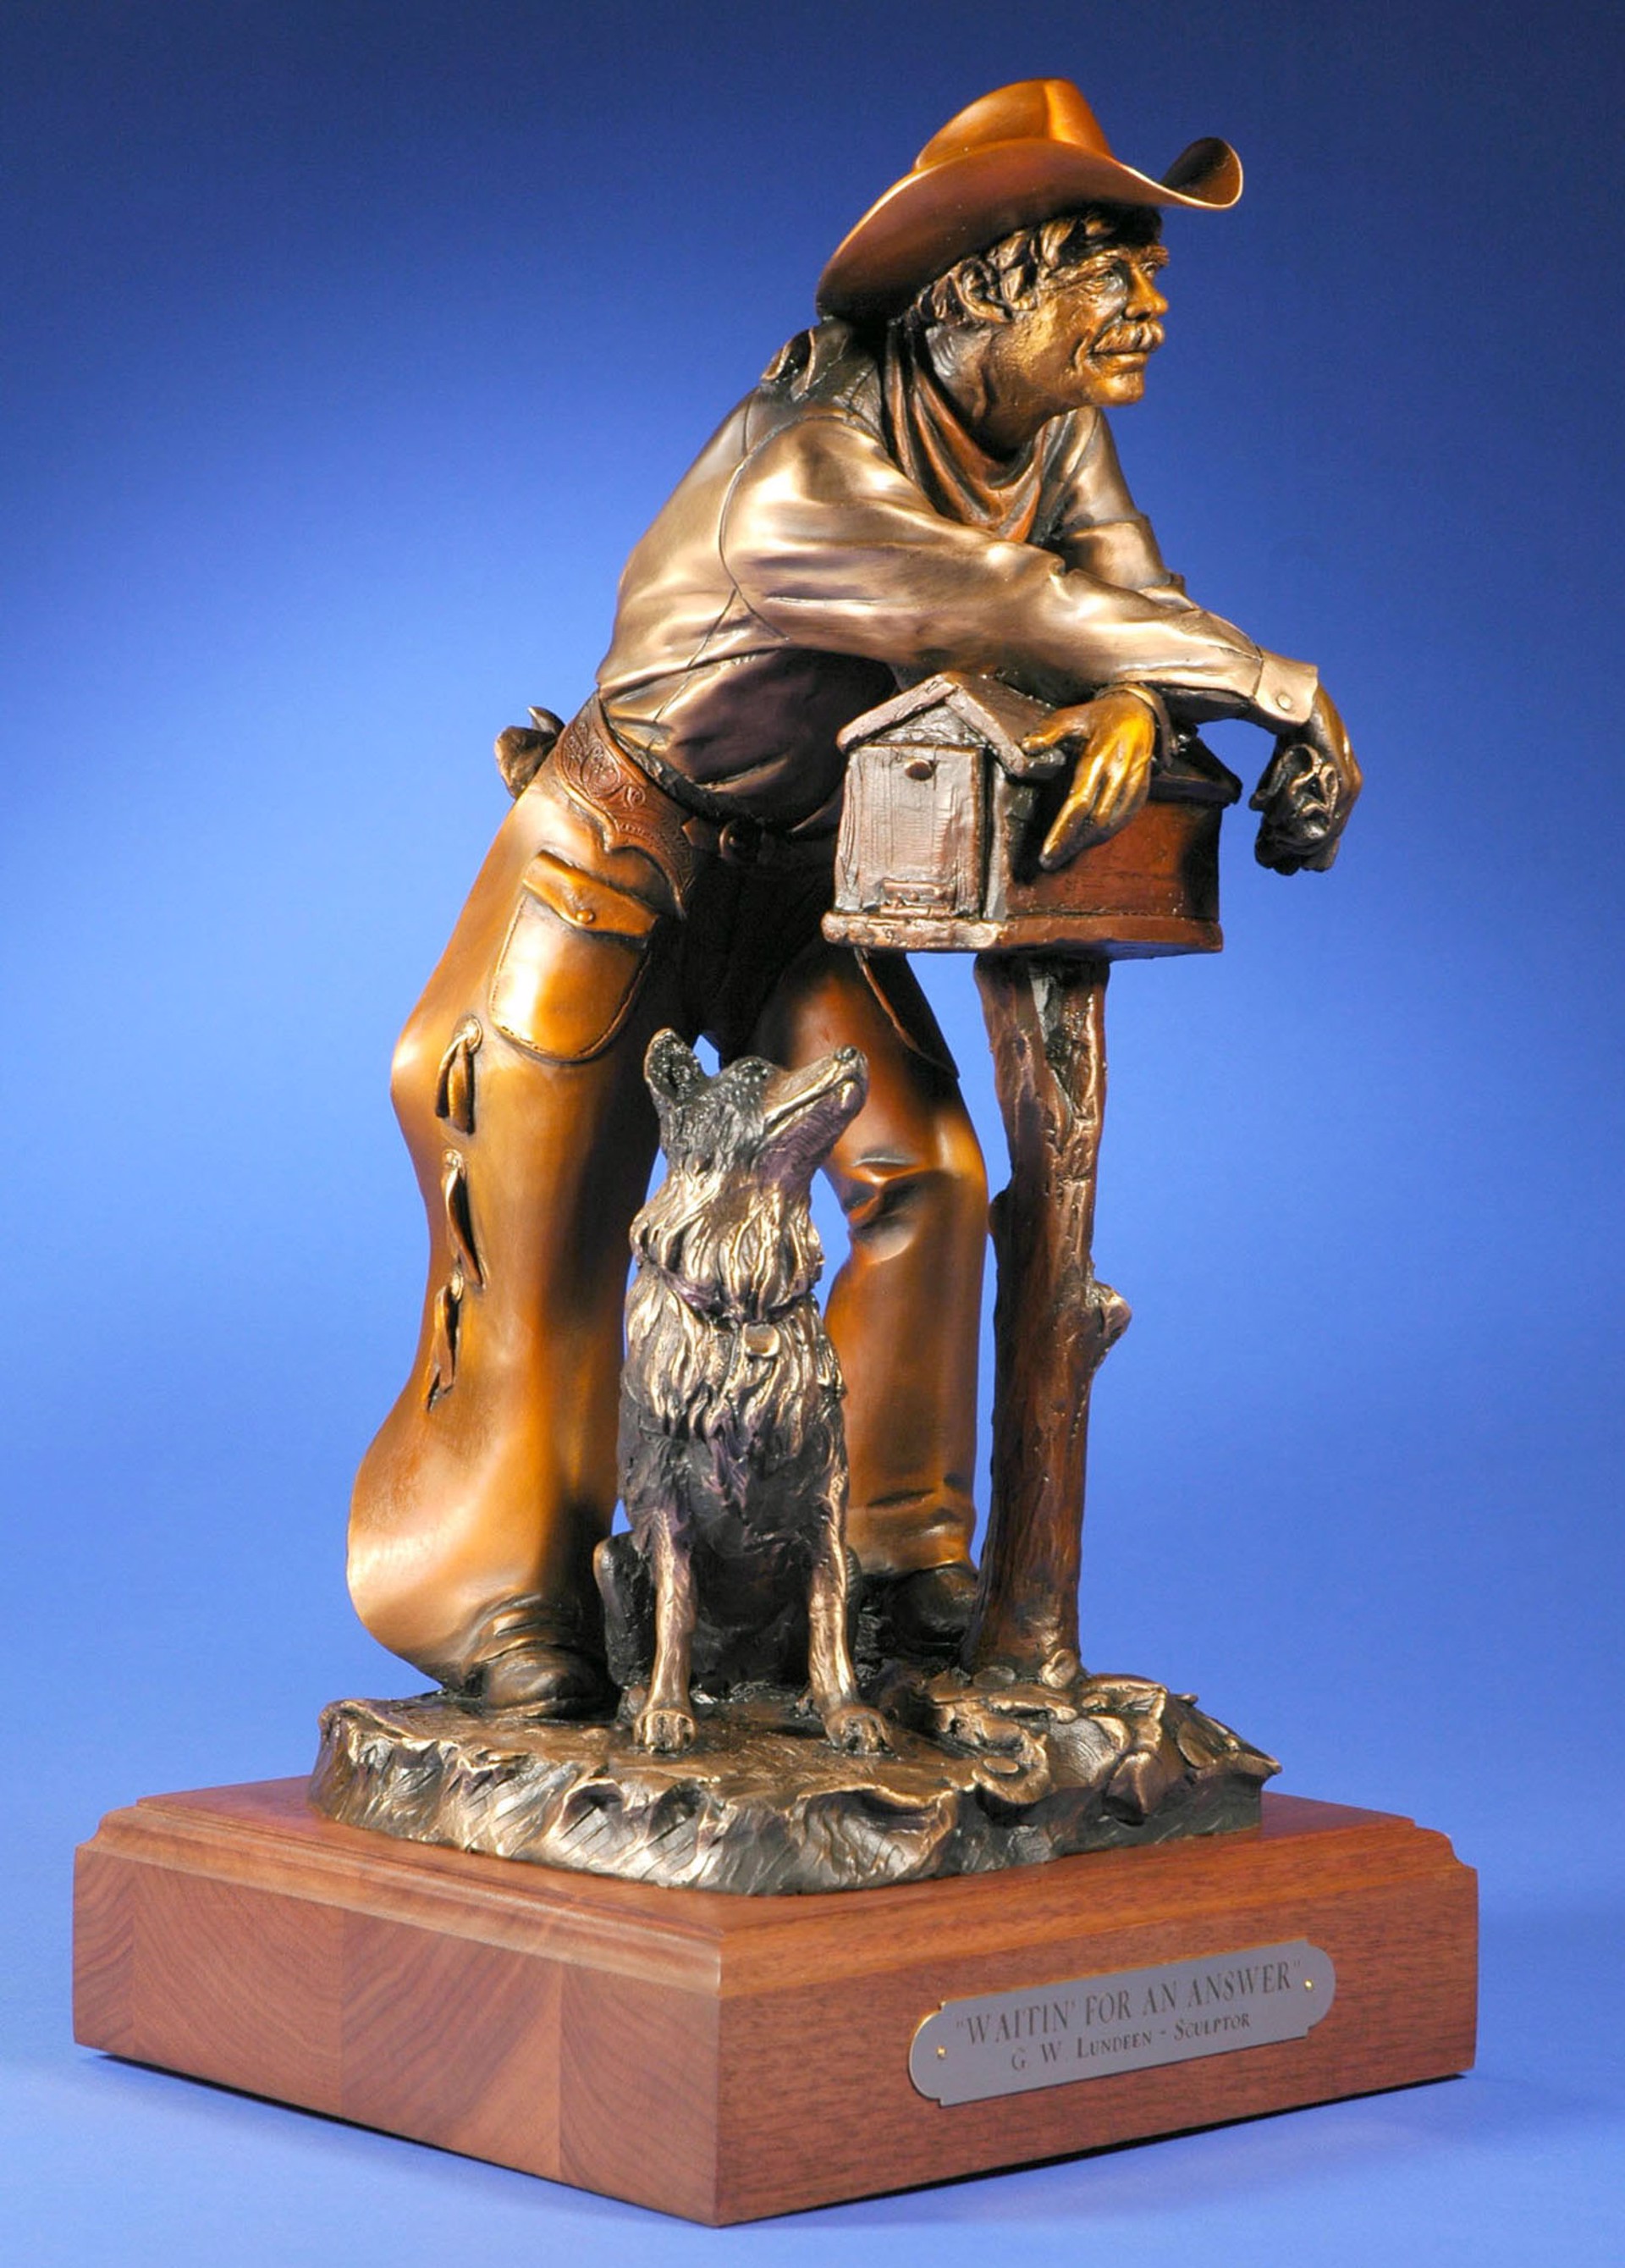 Waitin' for an Answer by George Lundeen